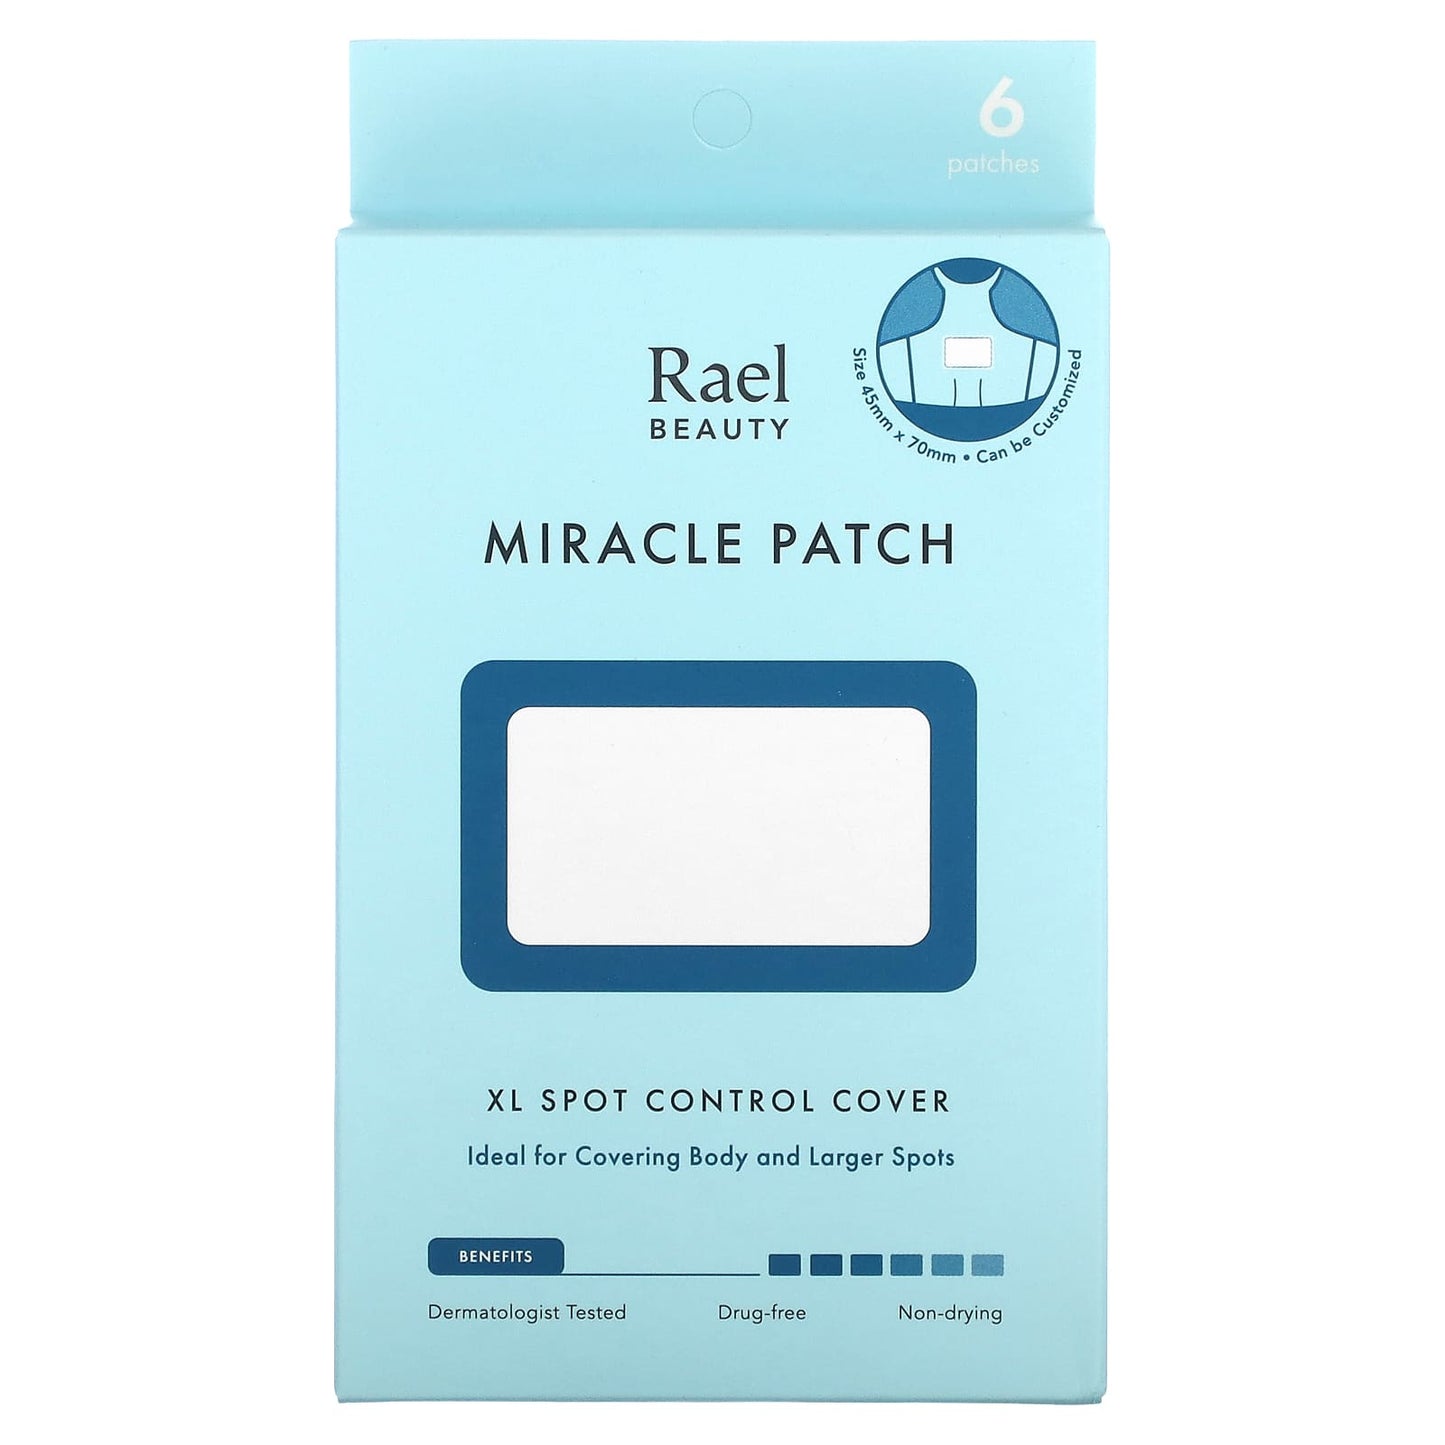 Rael-Beauty-Miracle Patch-XL Spot Control Cover-6 Patches